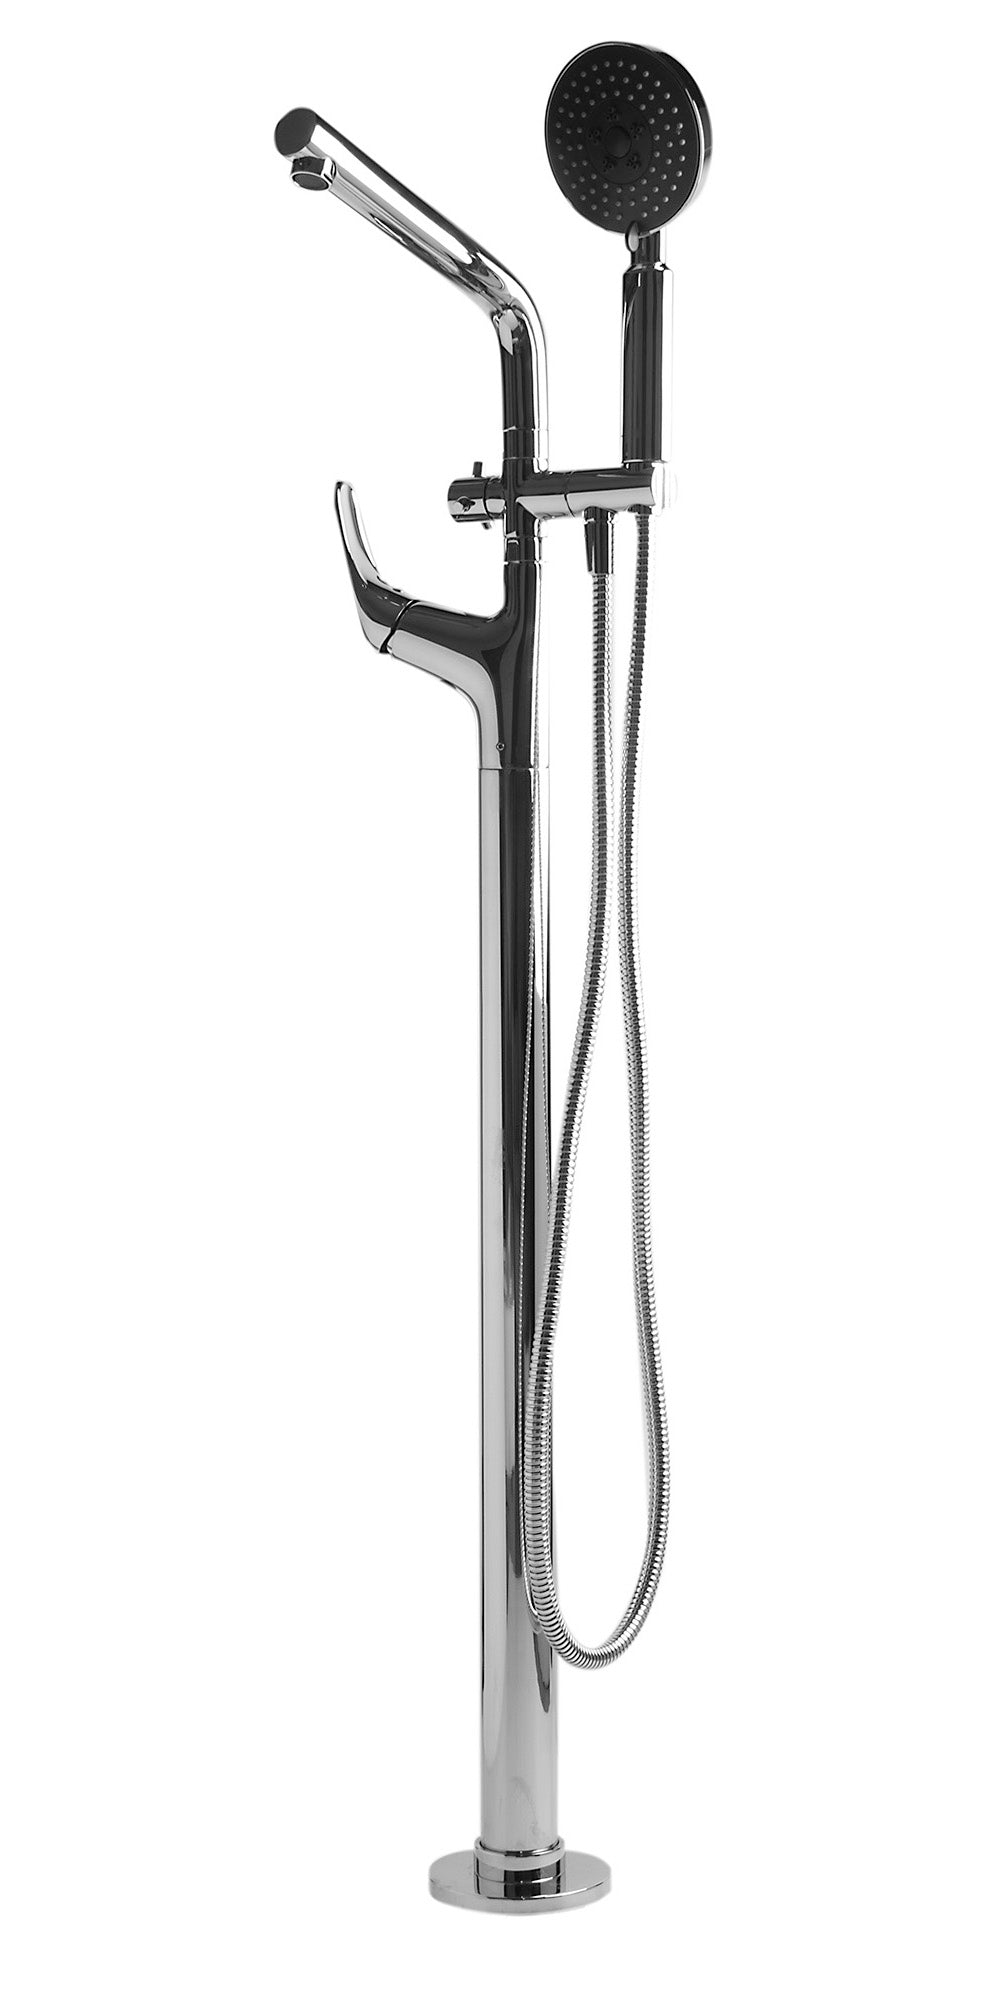 AB2758-PC Polished Chrome Floor Mounted Tub Filler + Mixer /w additional Hand Held Shower Head